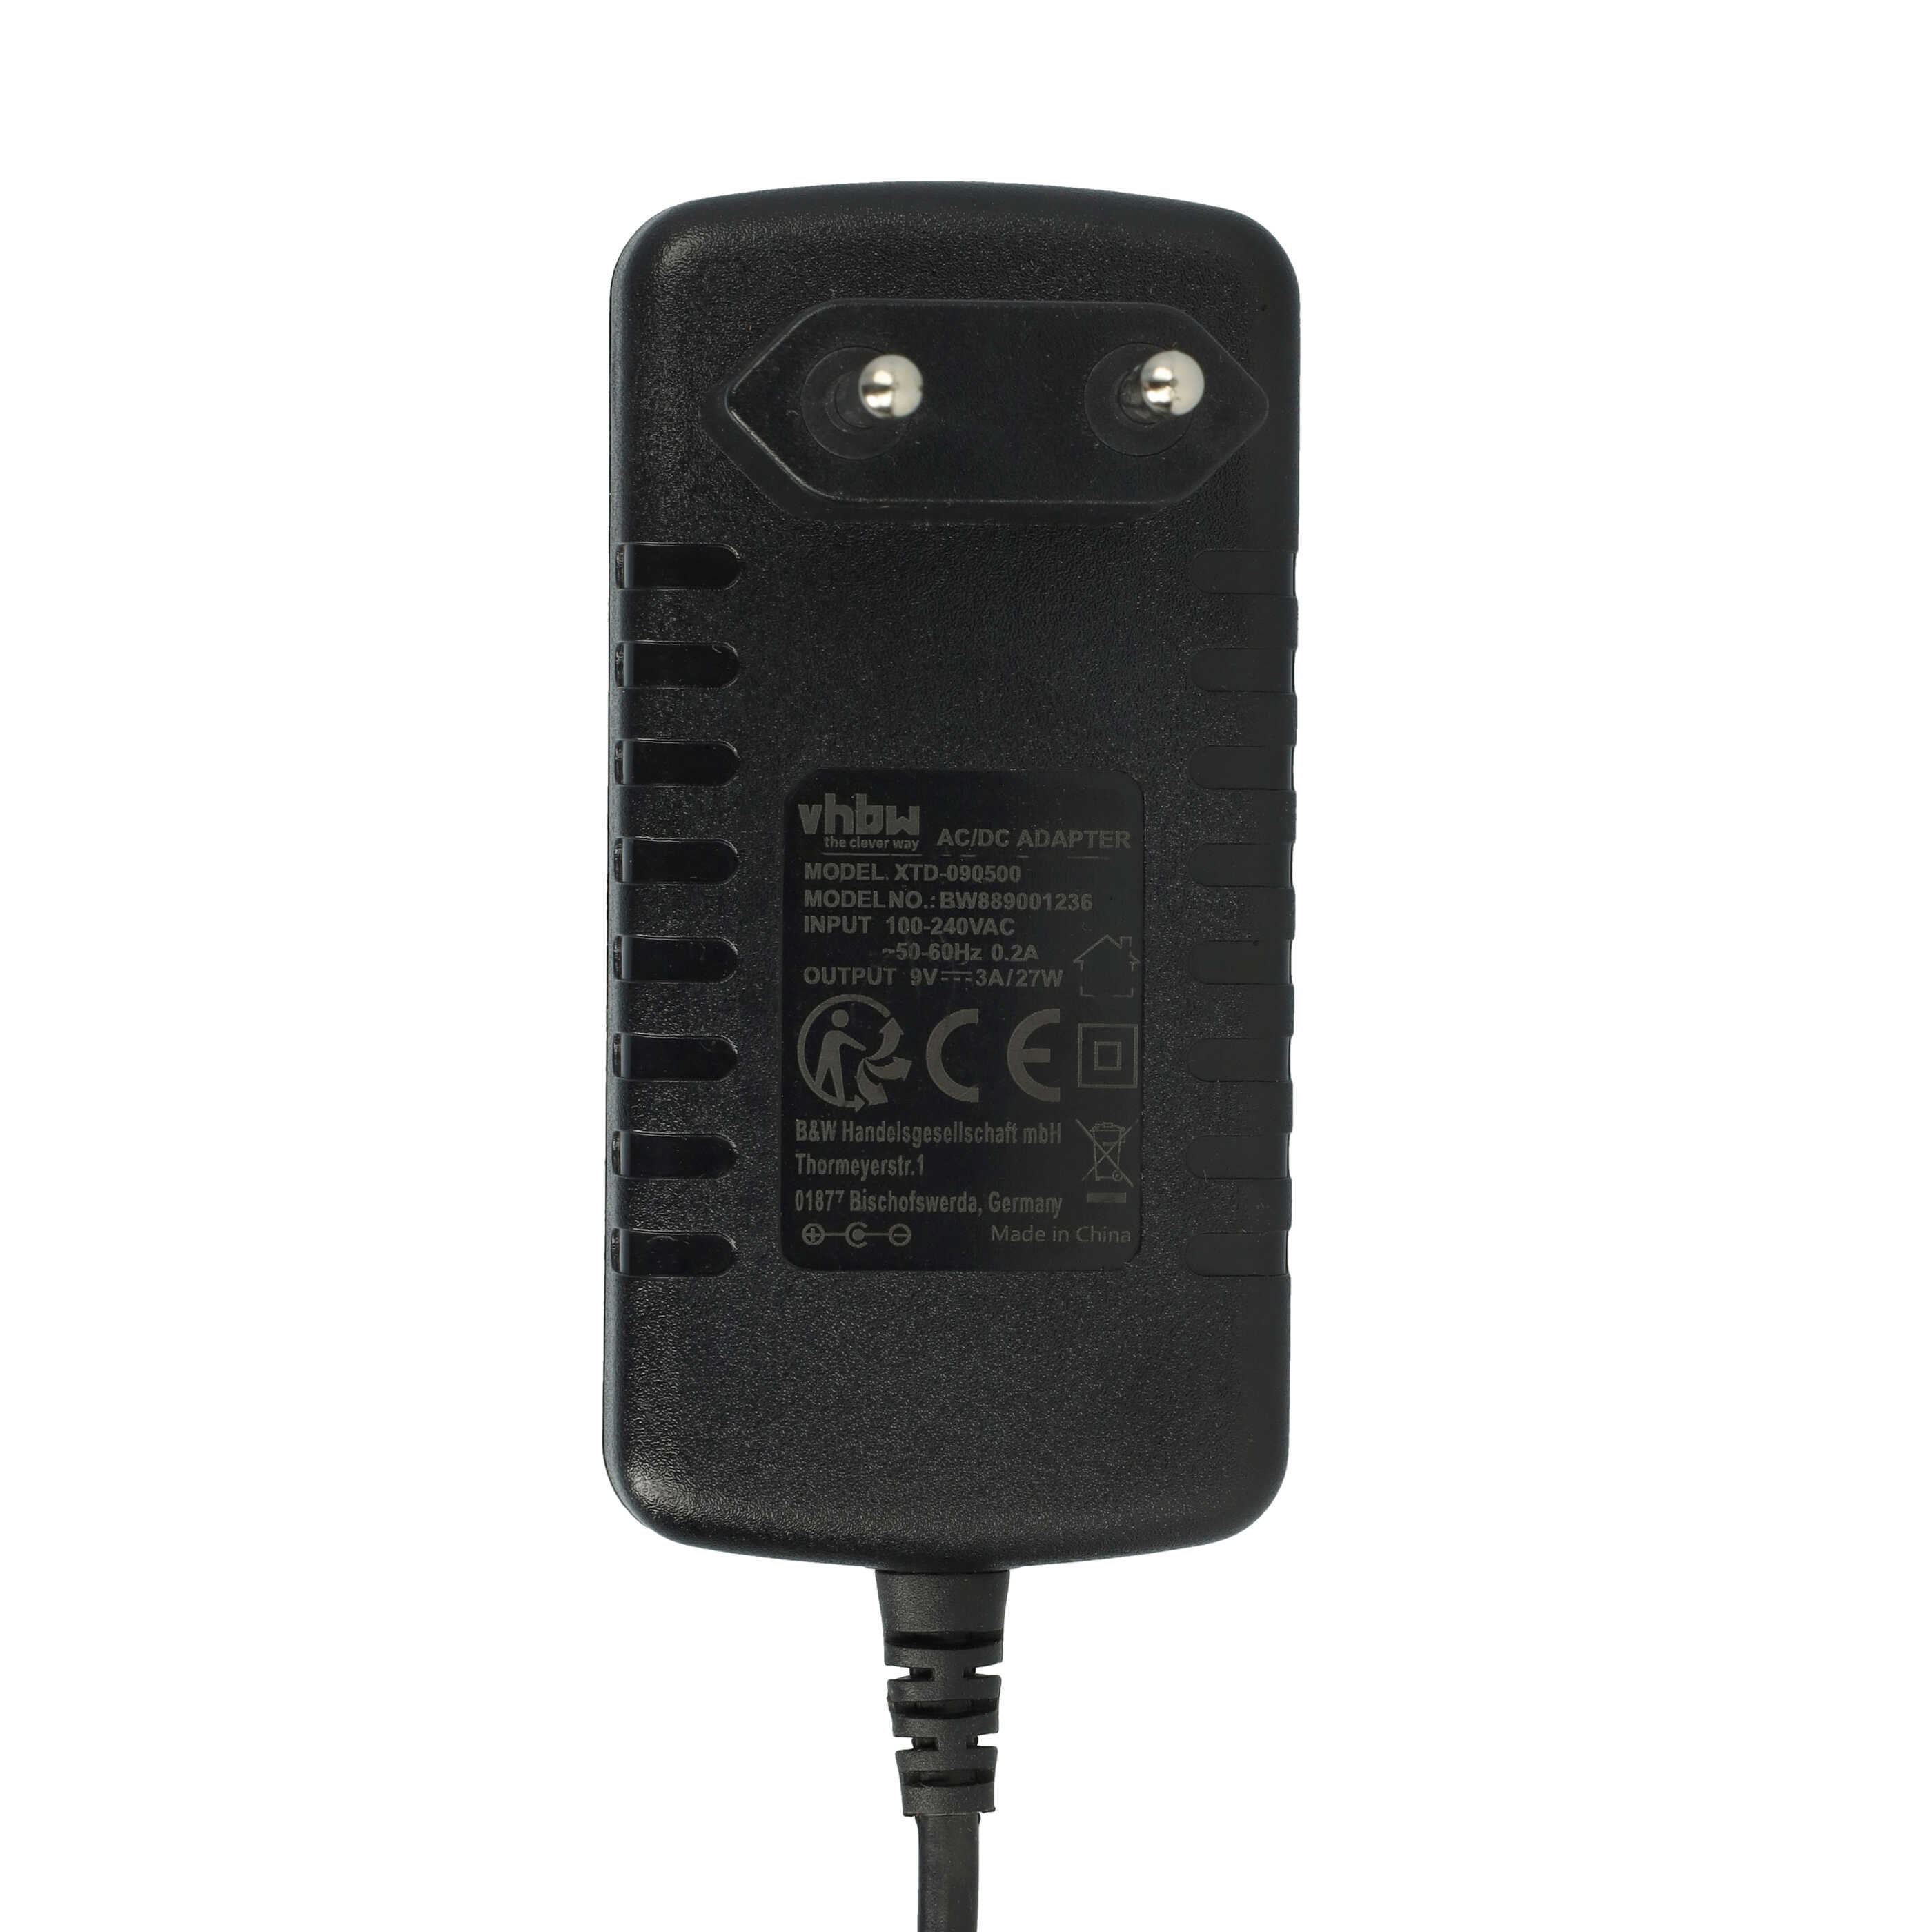 Mains Power Adapter replaces Line 6 DC-3H for Line 6 Landline Telephone, Home Telephone - 110 cm